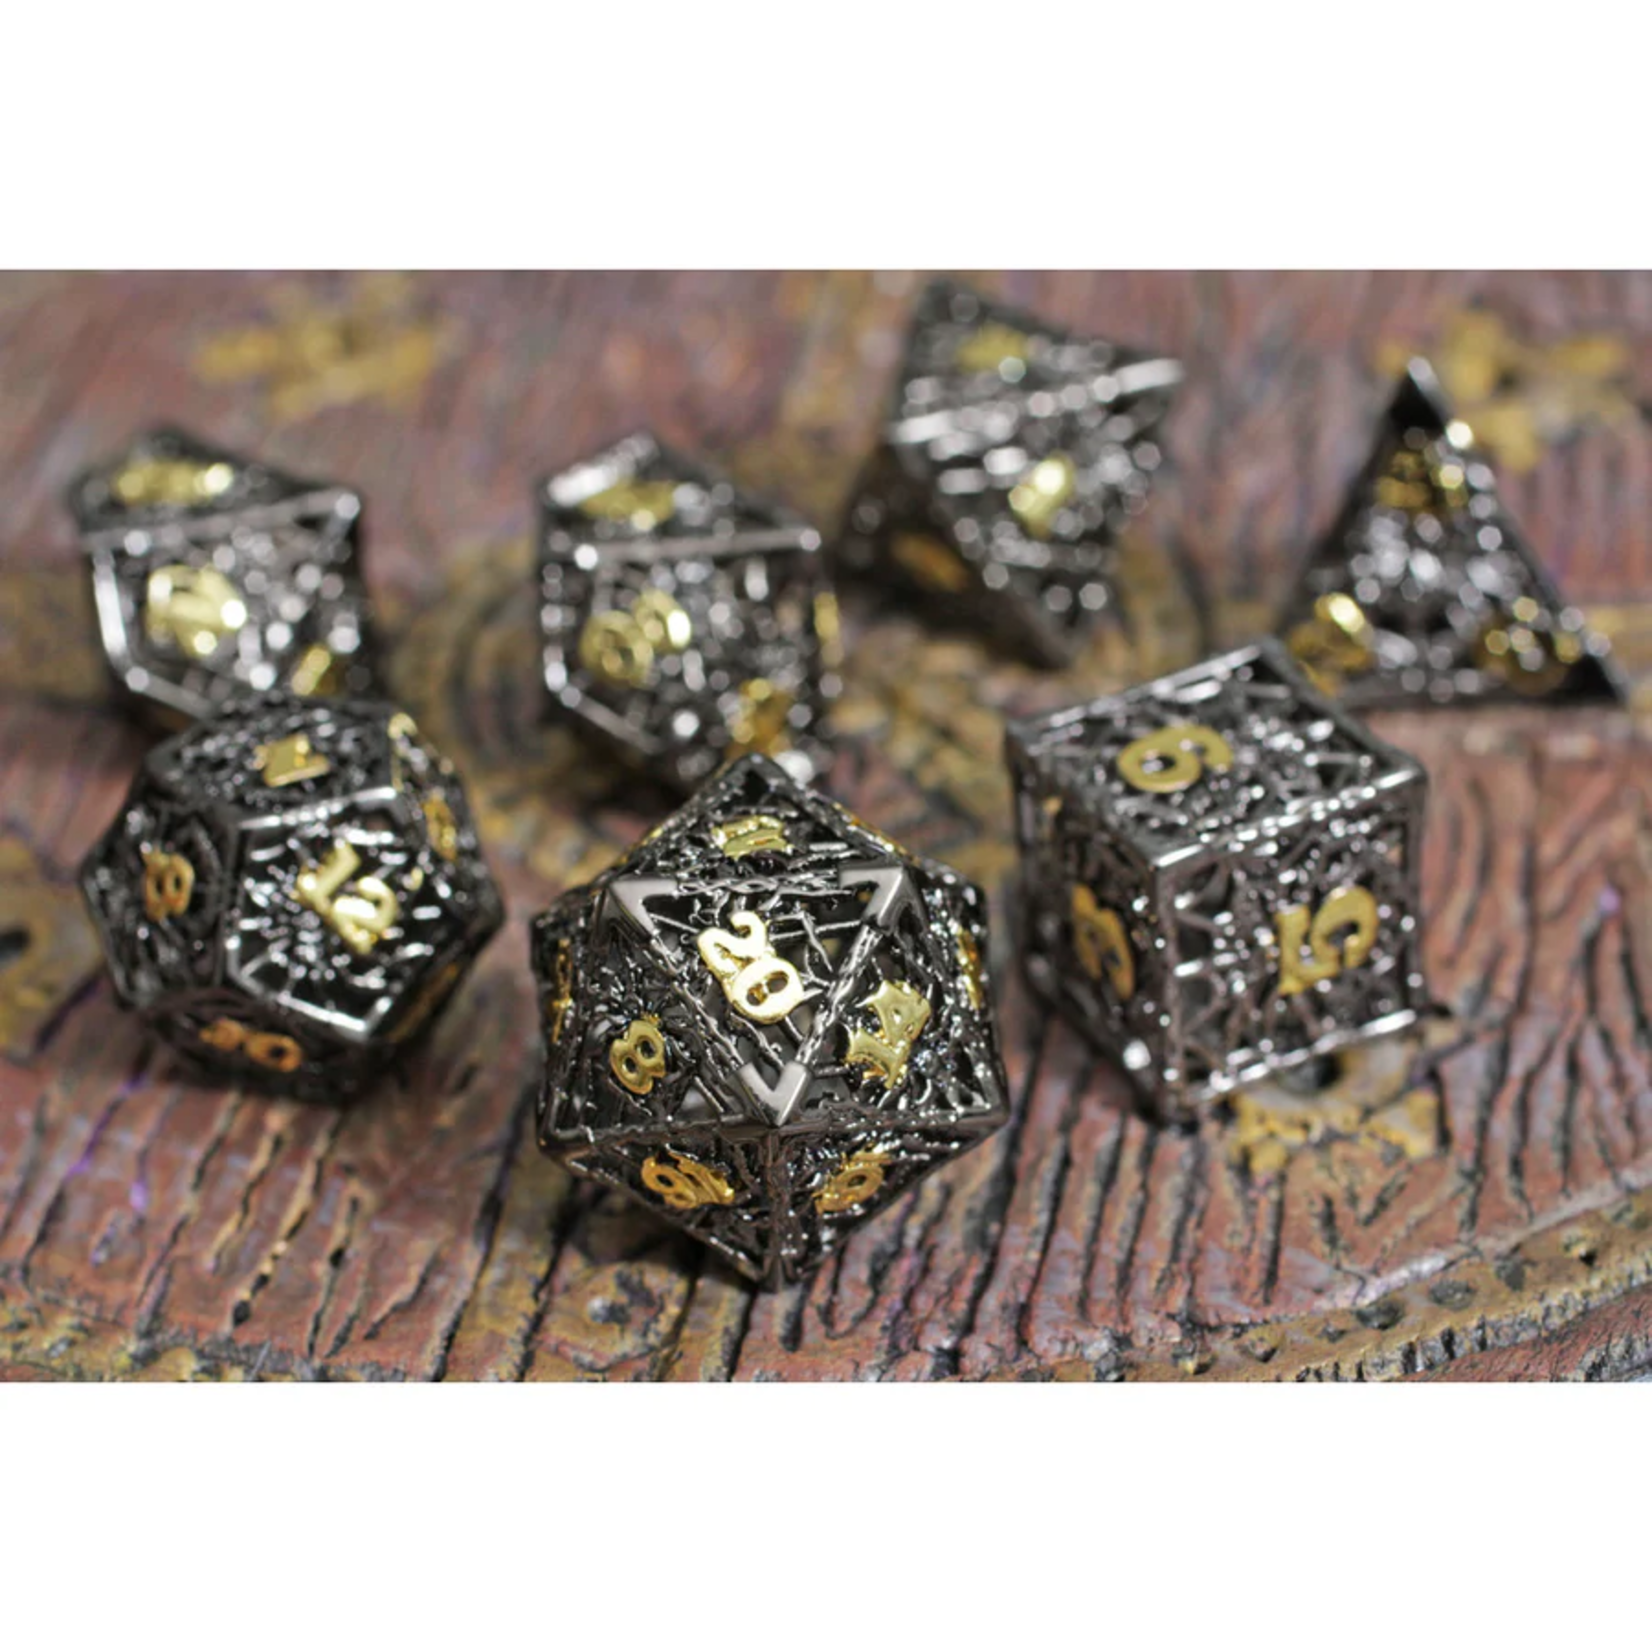 Forged Forged Lloth's Whisper Hollow Metal Polyhedral 7 die set